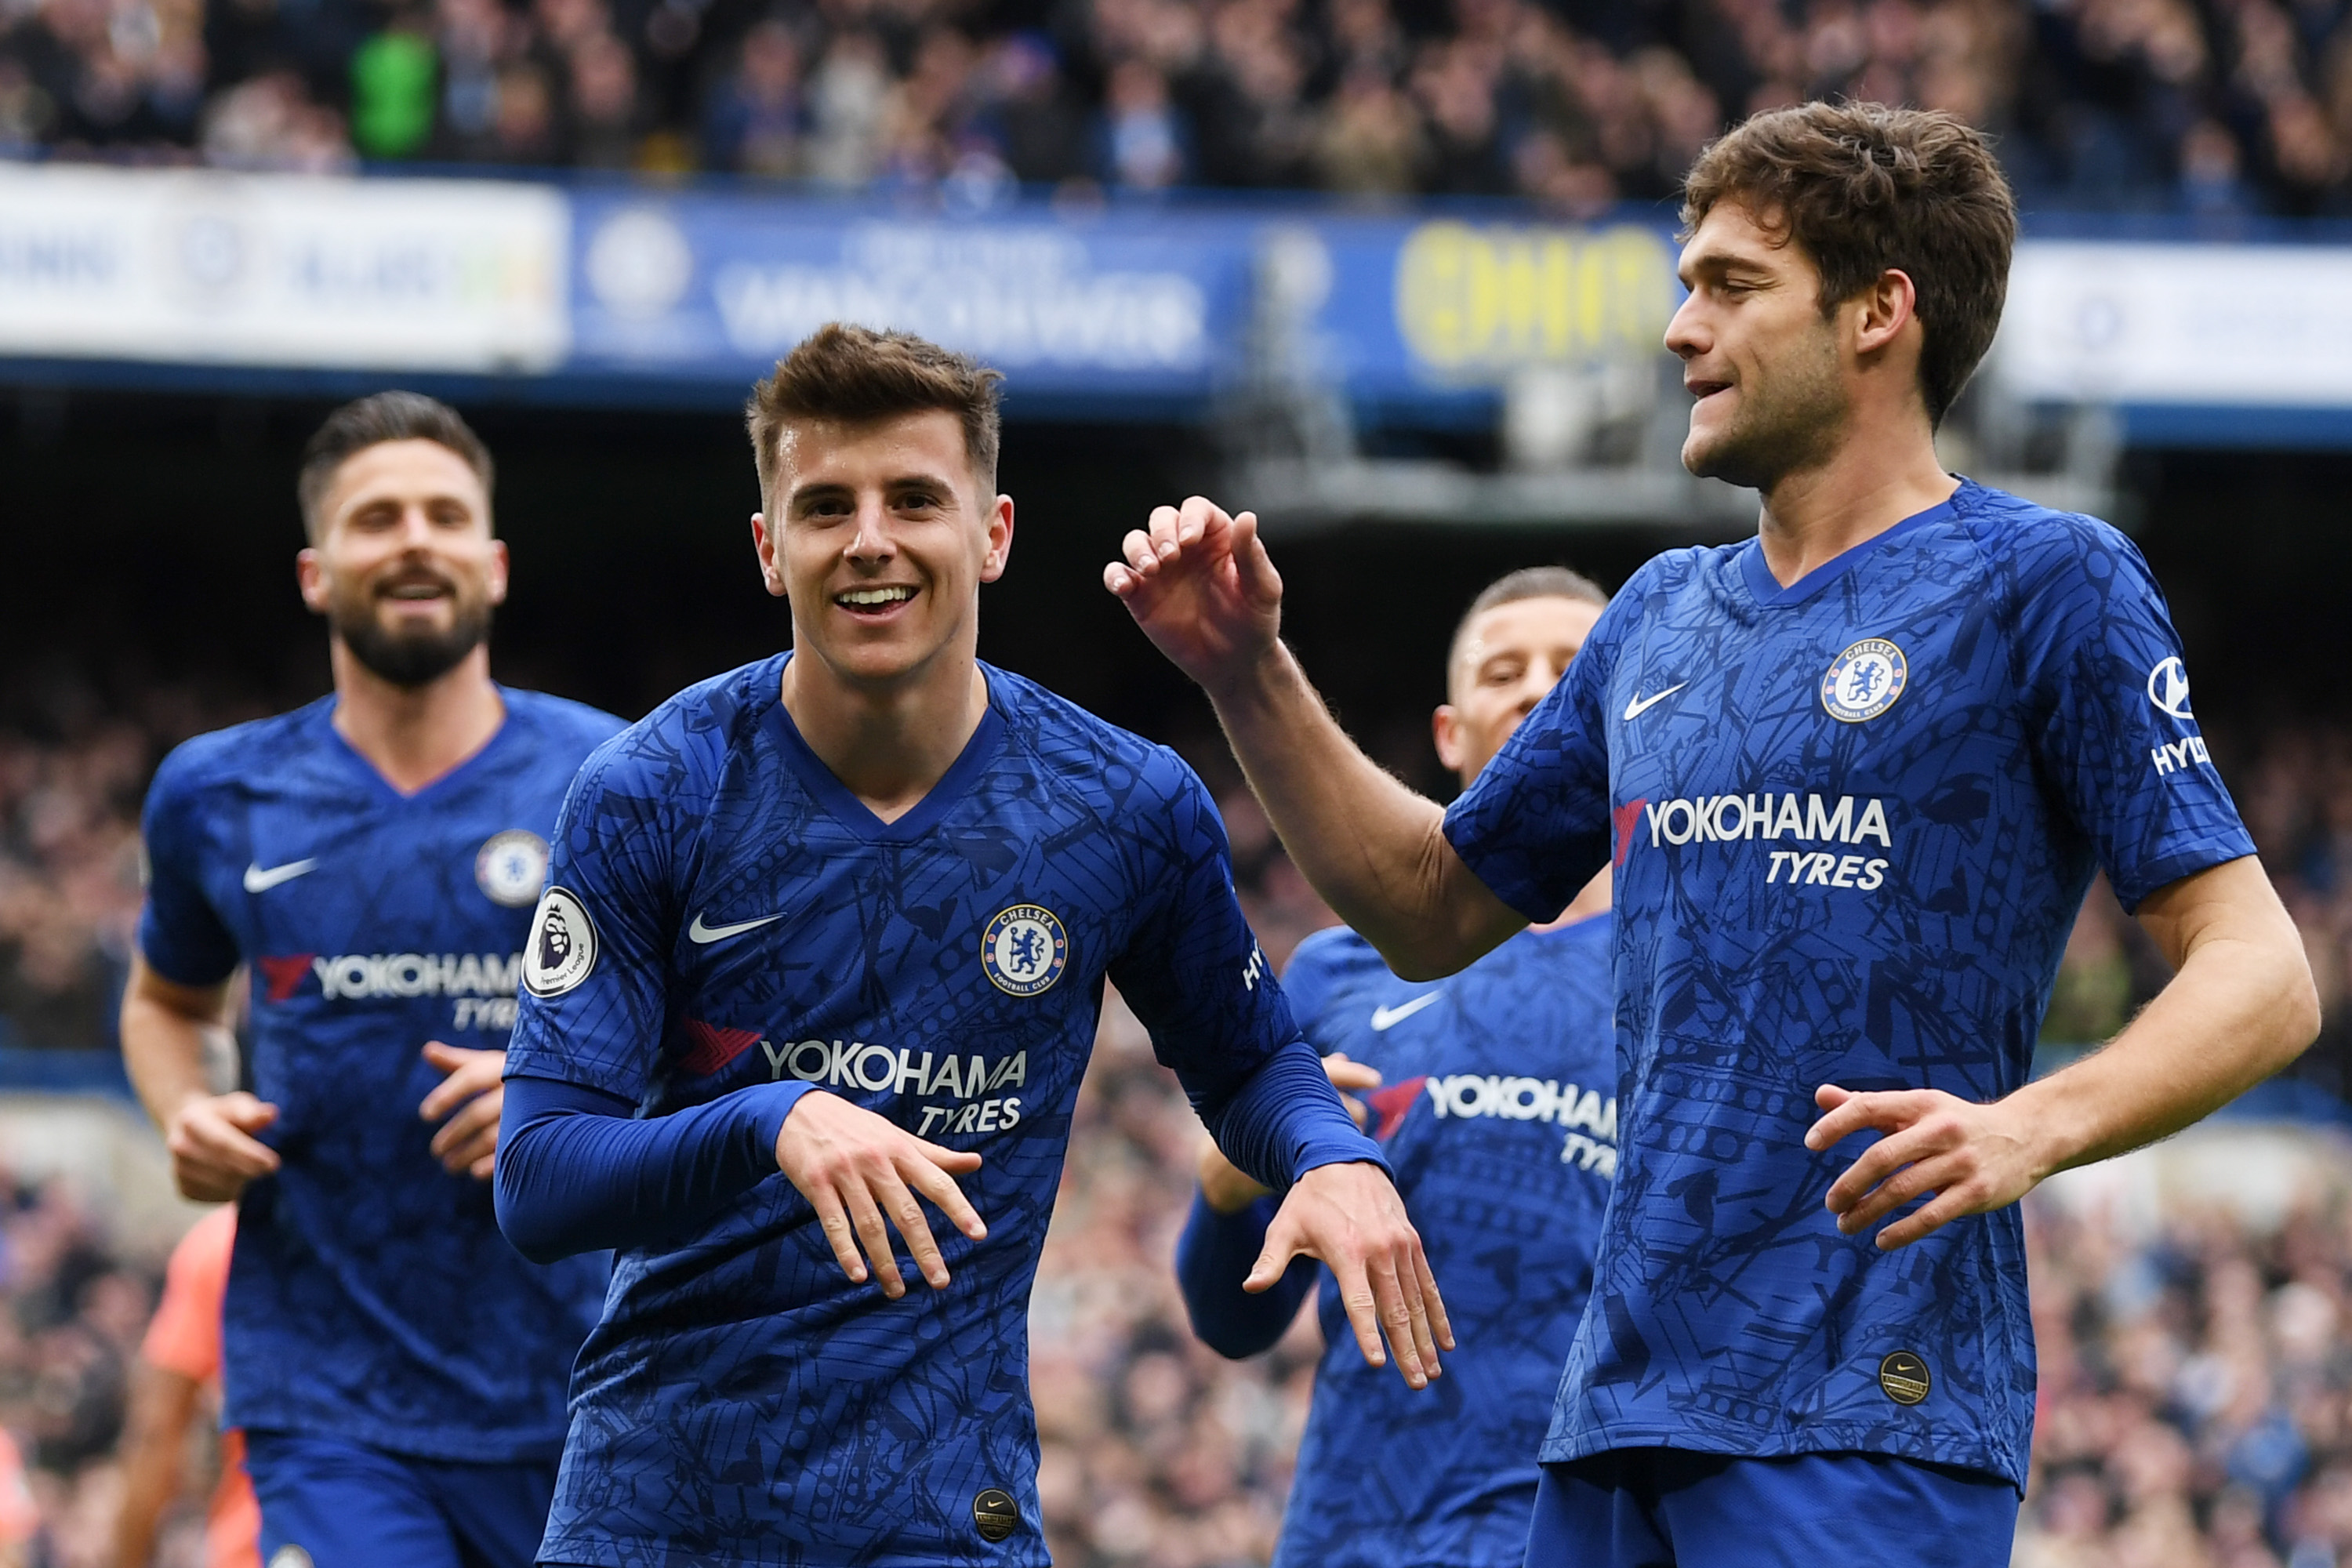 2020/21 Premier League Previews | Chelsea, Frank Lampard and their big money moves for the title